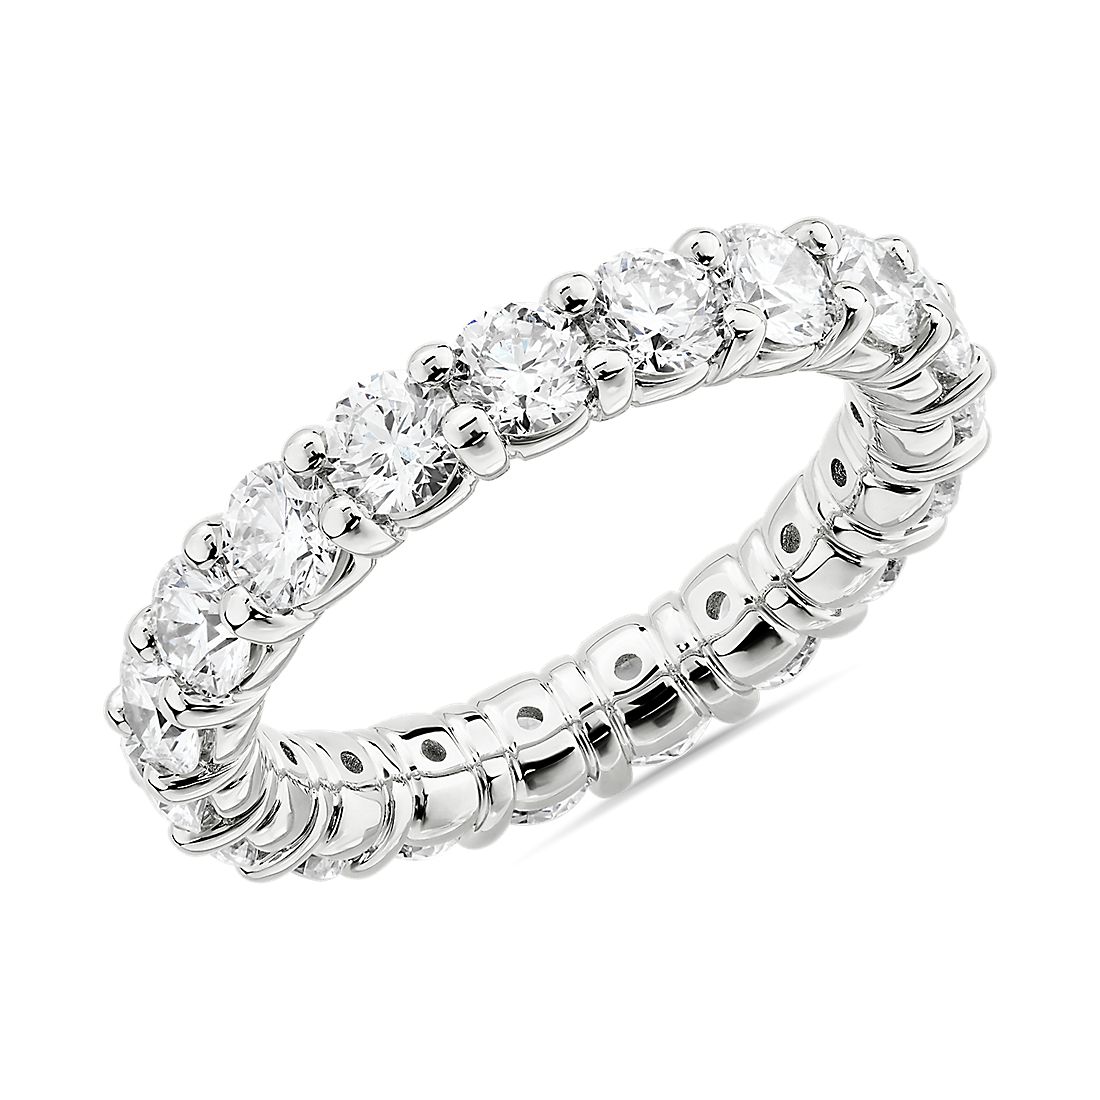 Comfort Fit Round Brilliant Diamond Eternity Ring in 14k White Gold (2.81 ct. tw.)